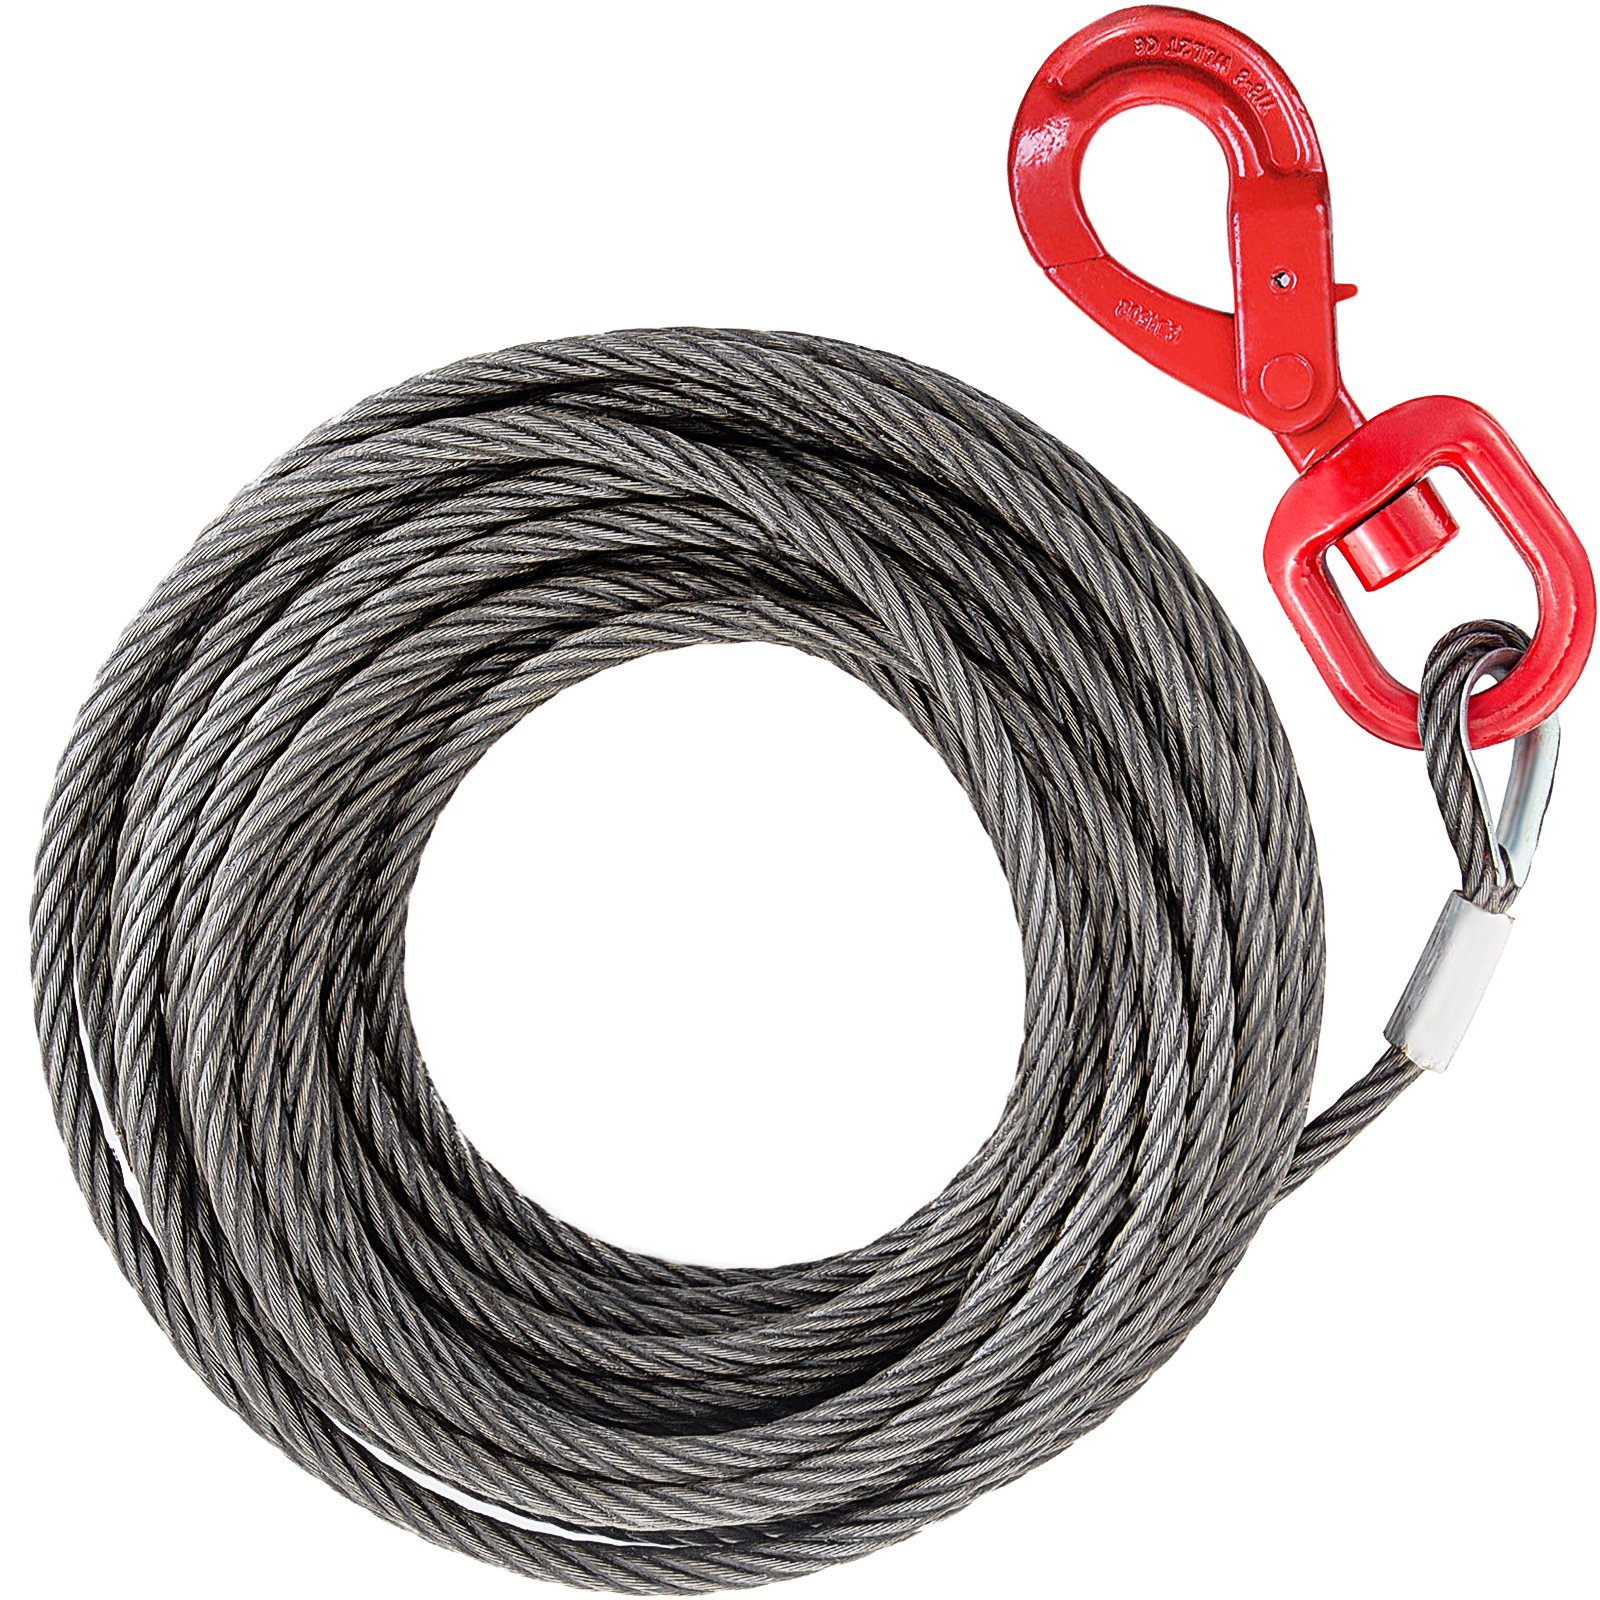 Fiber Core Winch Cable 8/17" X 100' Wire Rope Self Locking Swivel Hook от Vevor Many GEOs